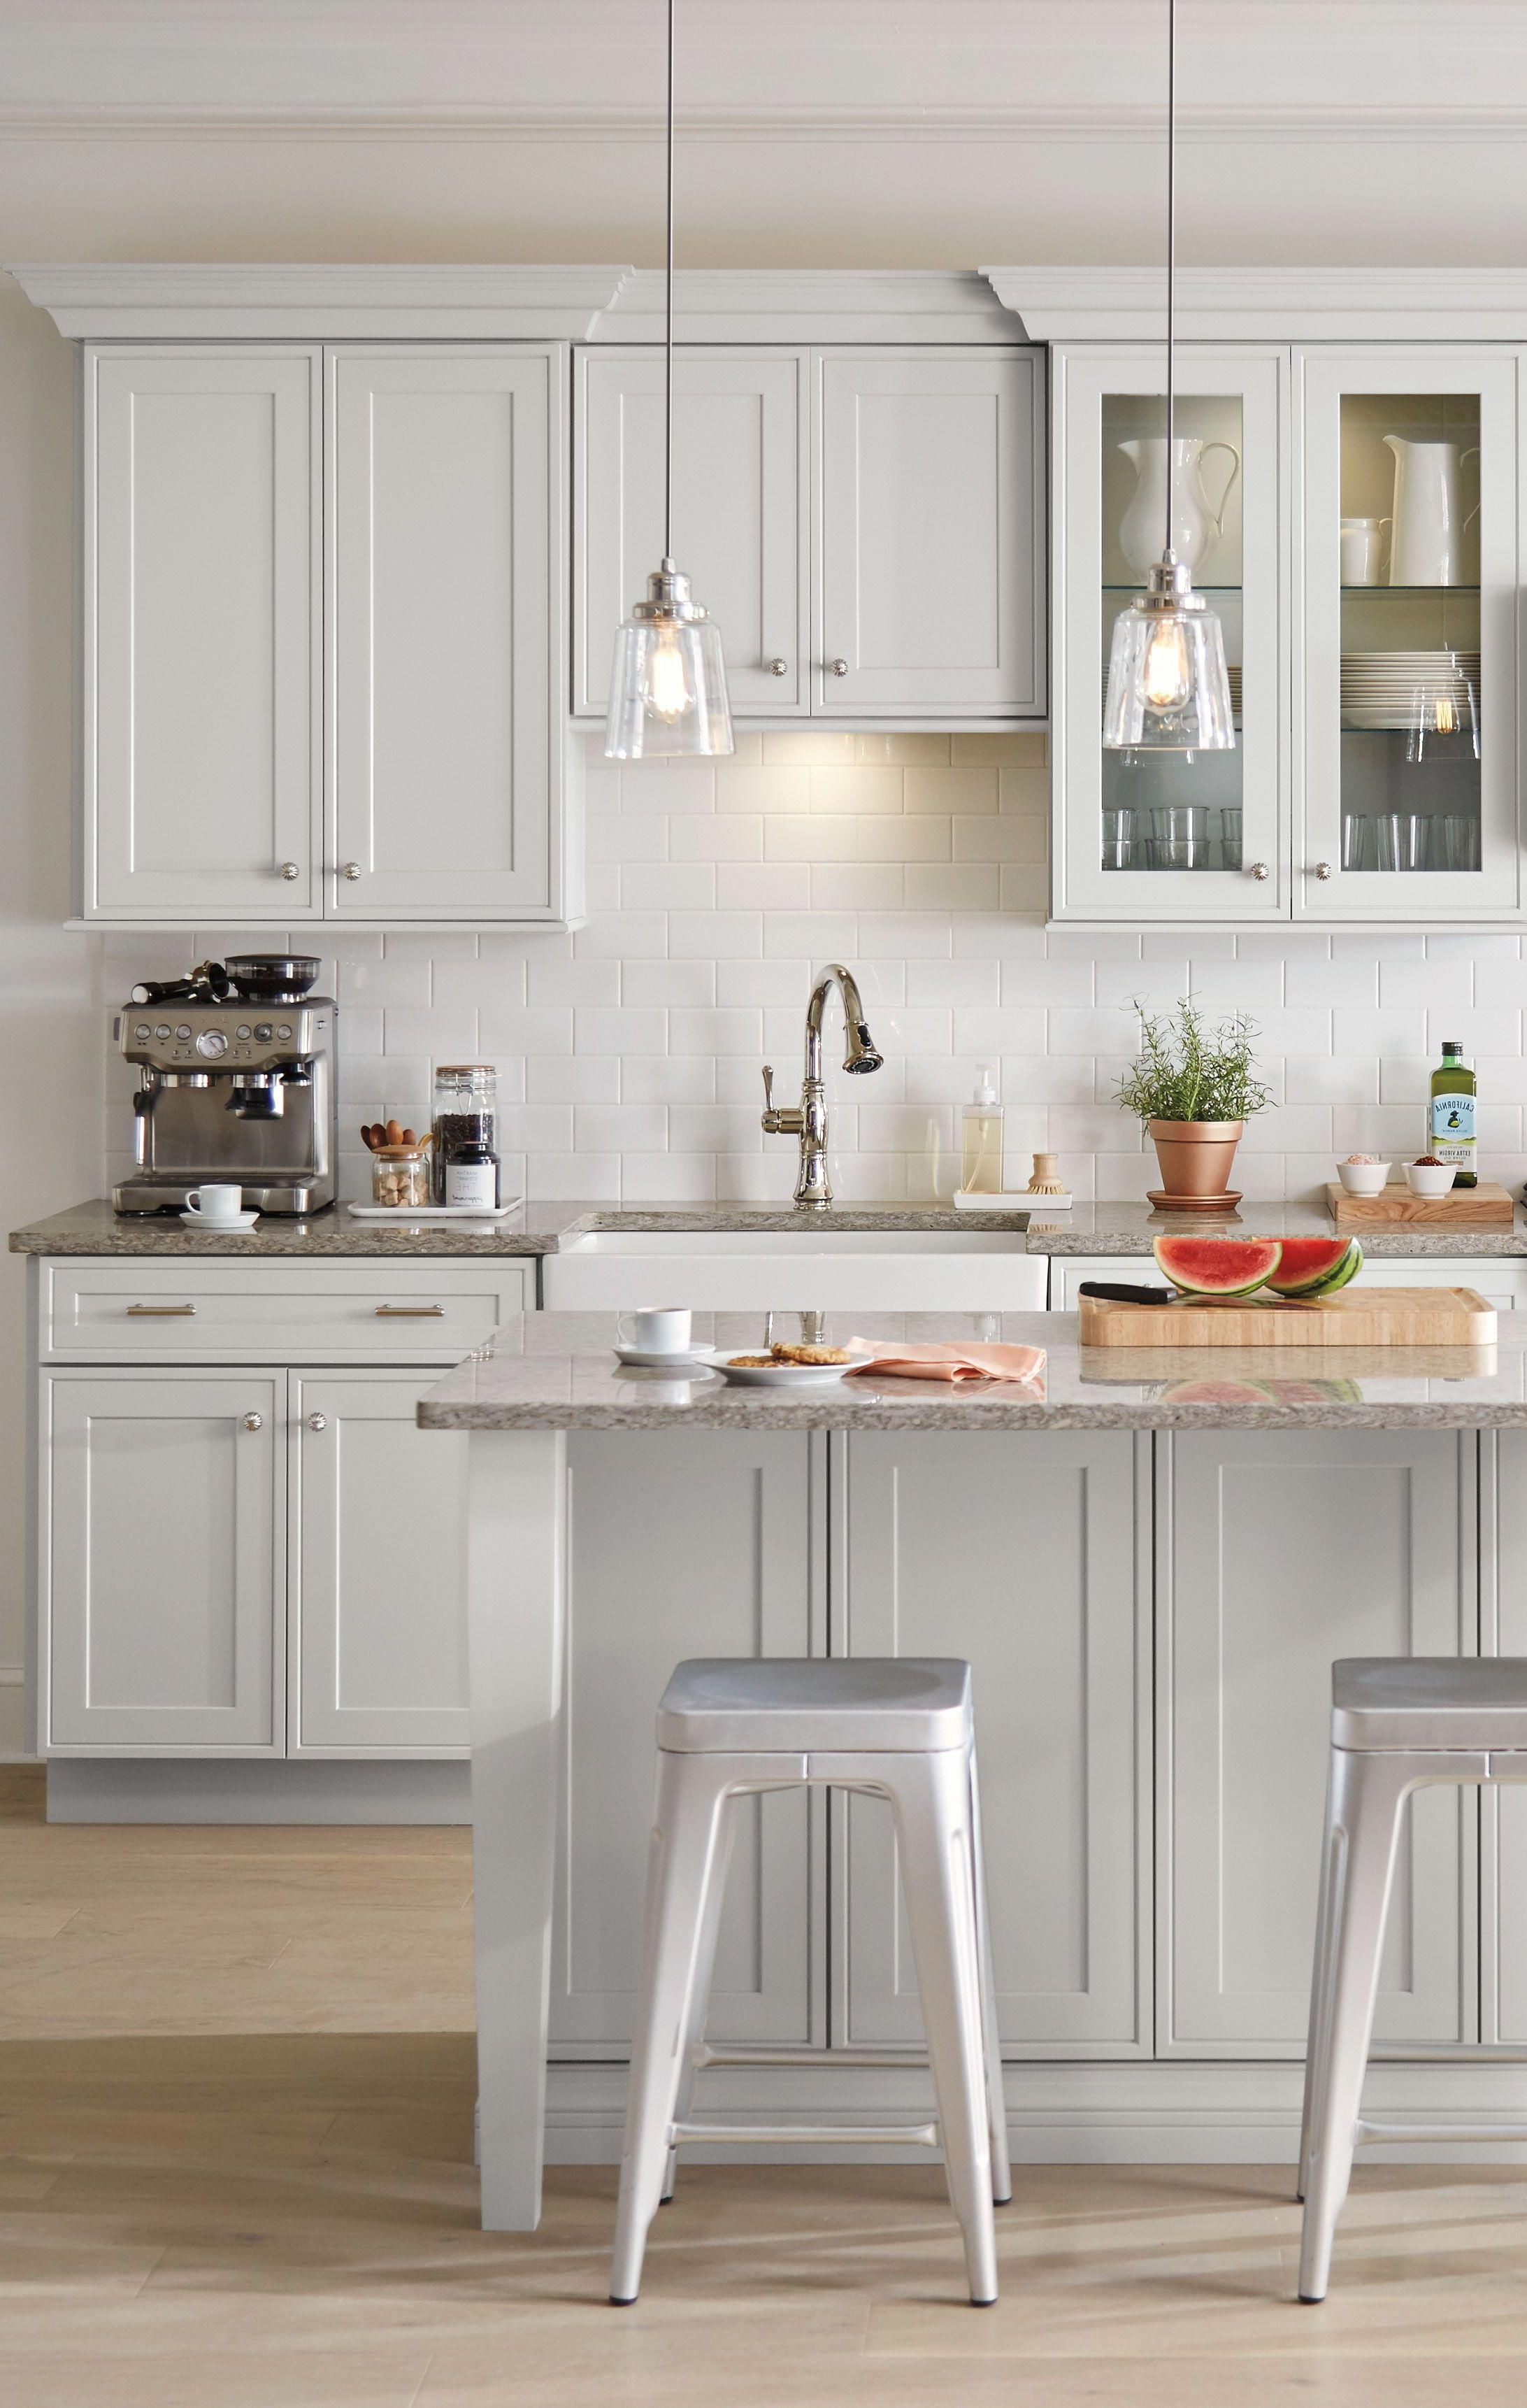 Martha Stewart Living Kitchens Available Only At The Home Depot Offer More Than 75 Beautiful